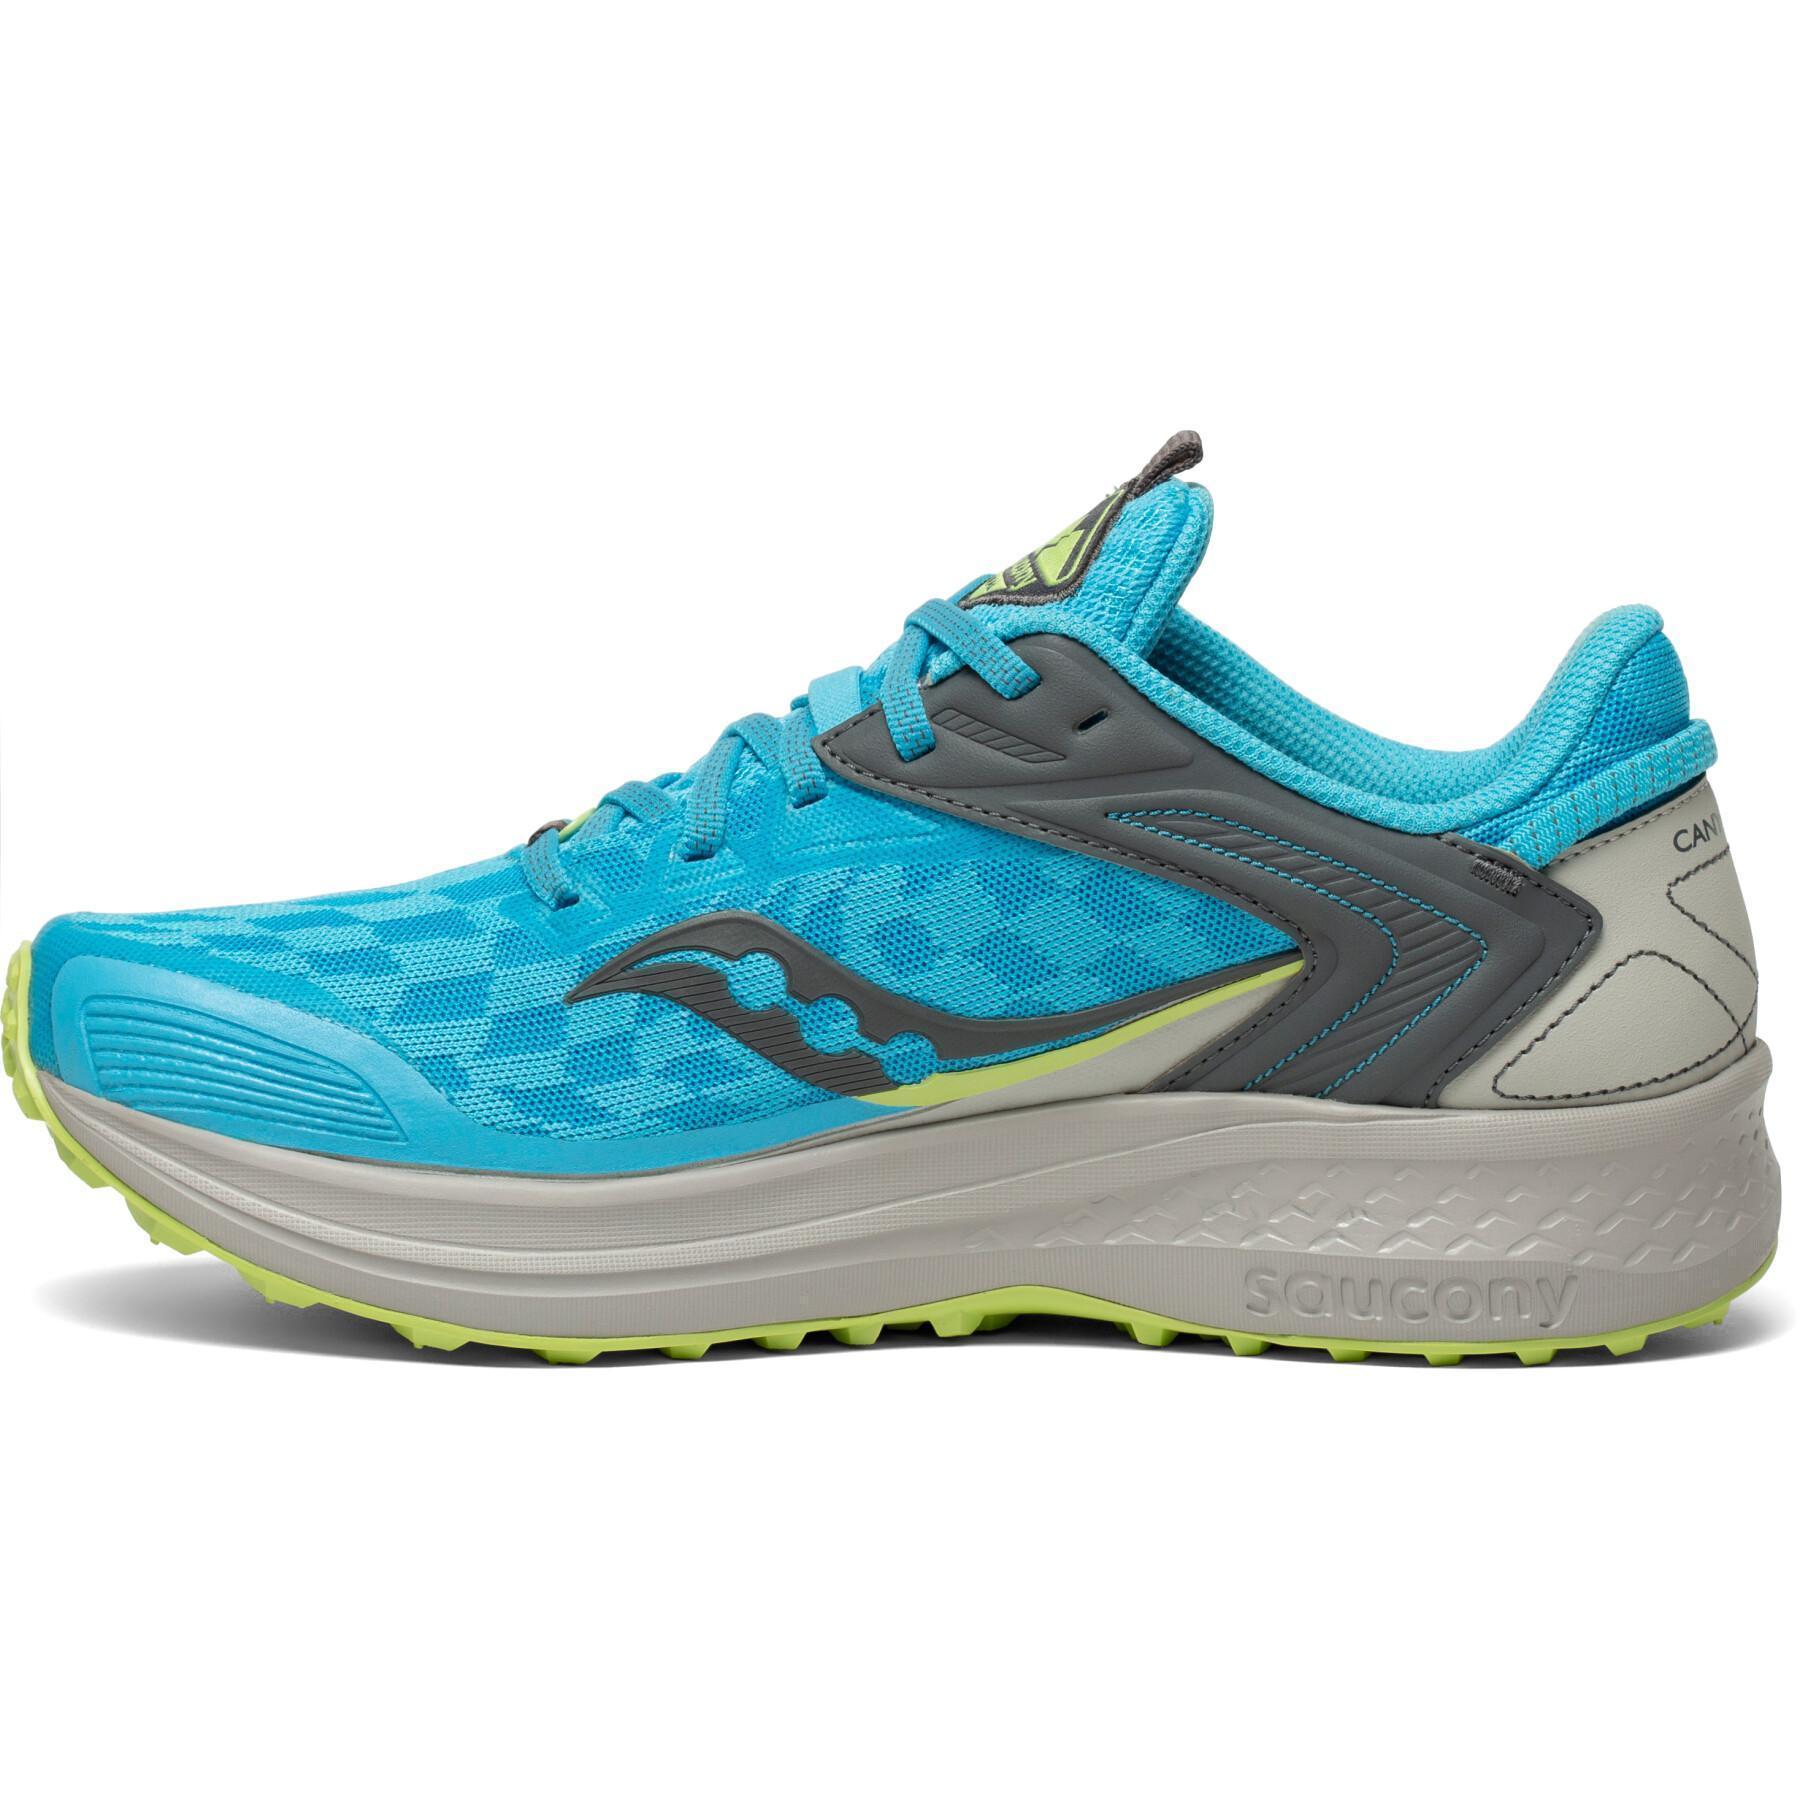 Women's shoes Saucony canyon tr2